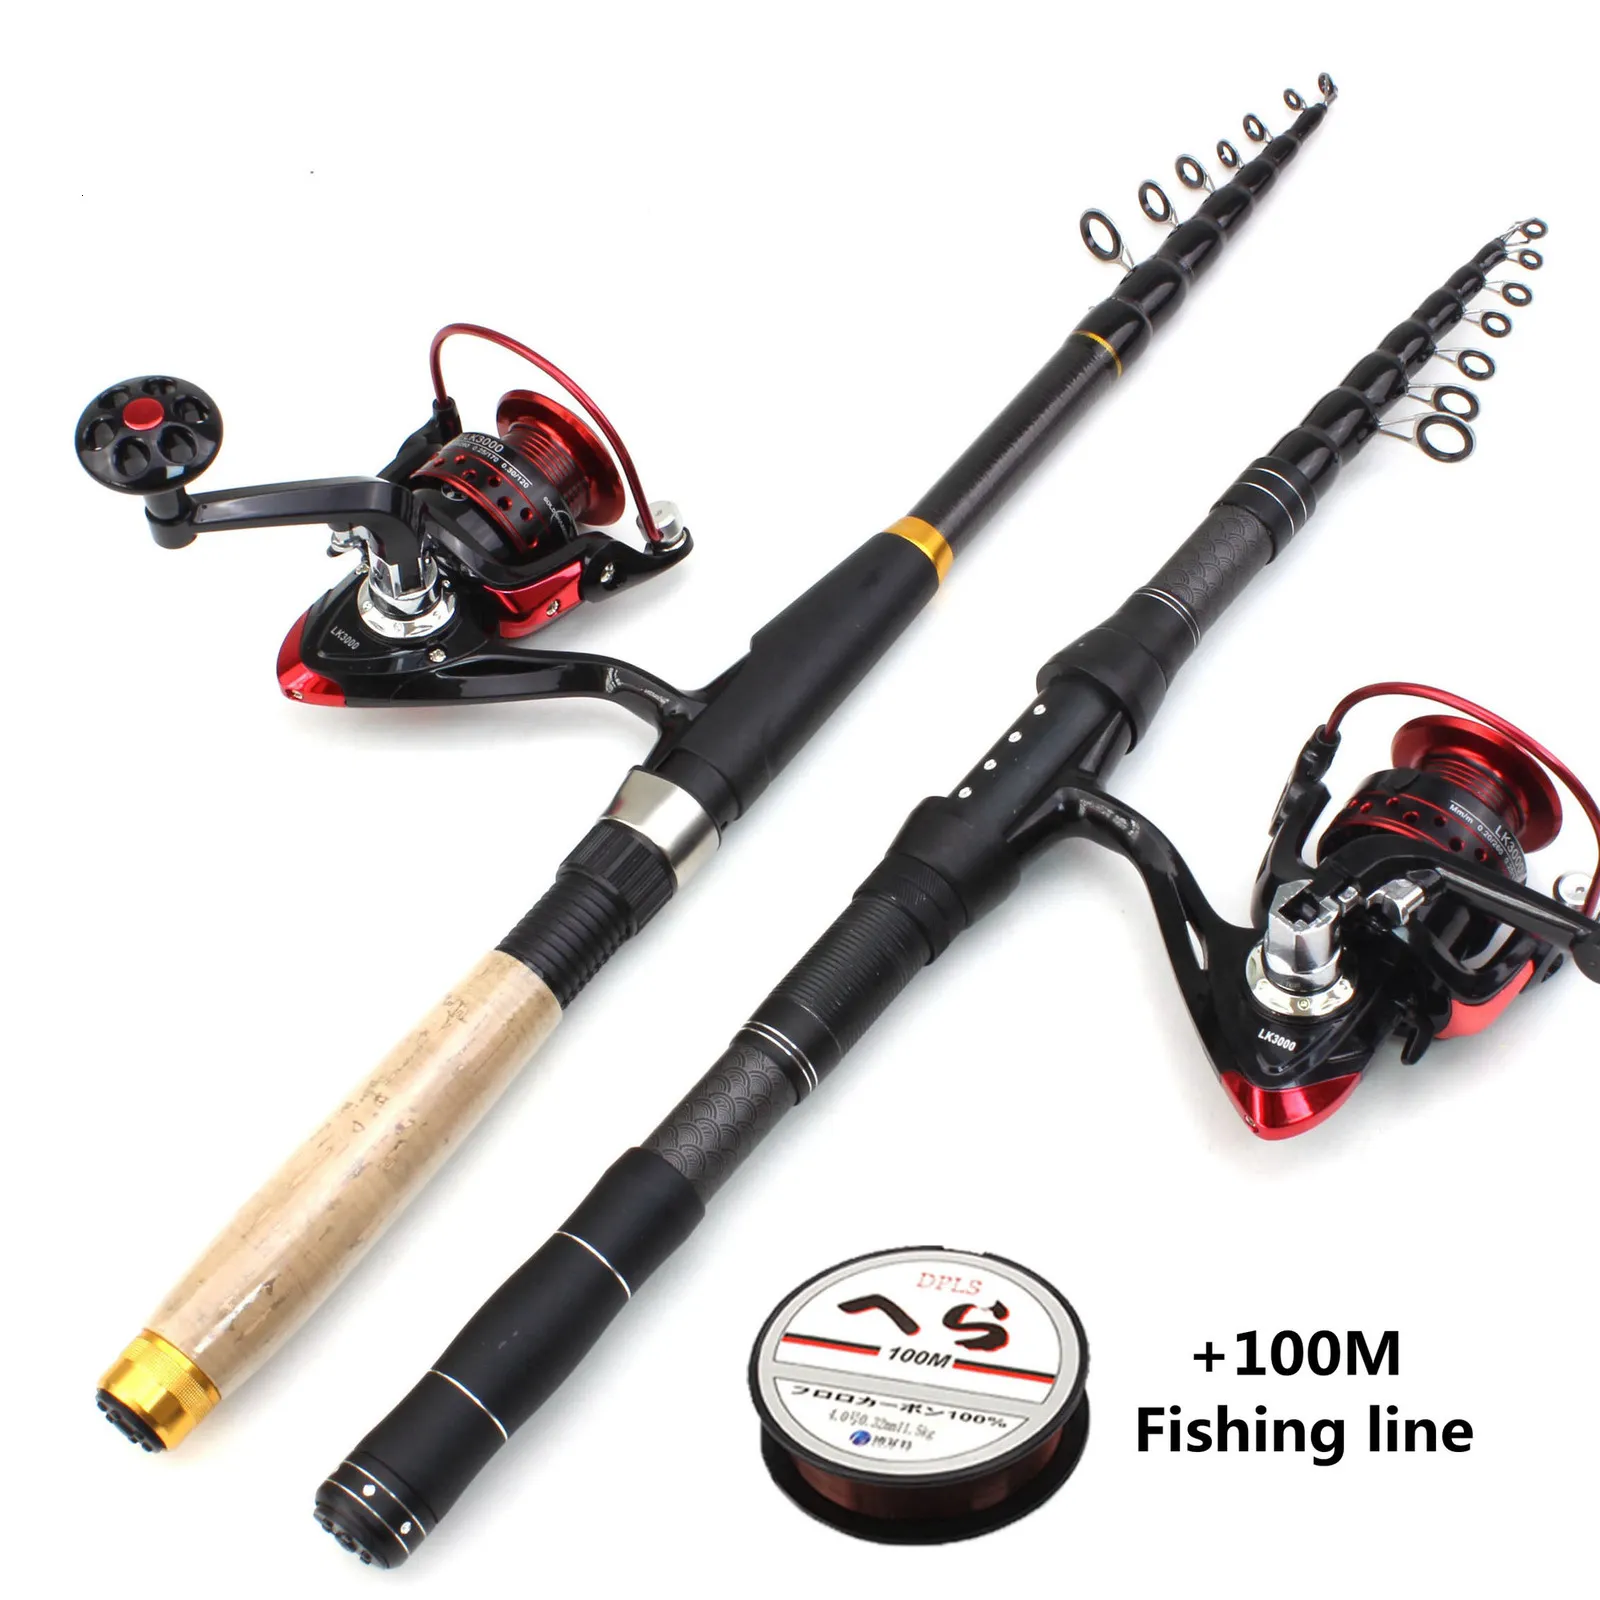 Boat Fishing Rods 1.8m 2.1m 2.4m 2.7m 3.0m Carbon Fiber Telescopic Fishing Rod Portable Spinning Rod and Spinning Reels Multifunction set 230603